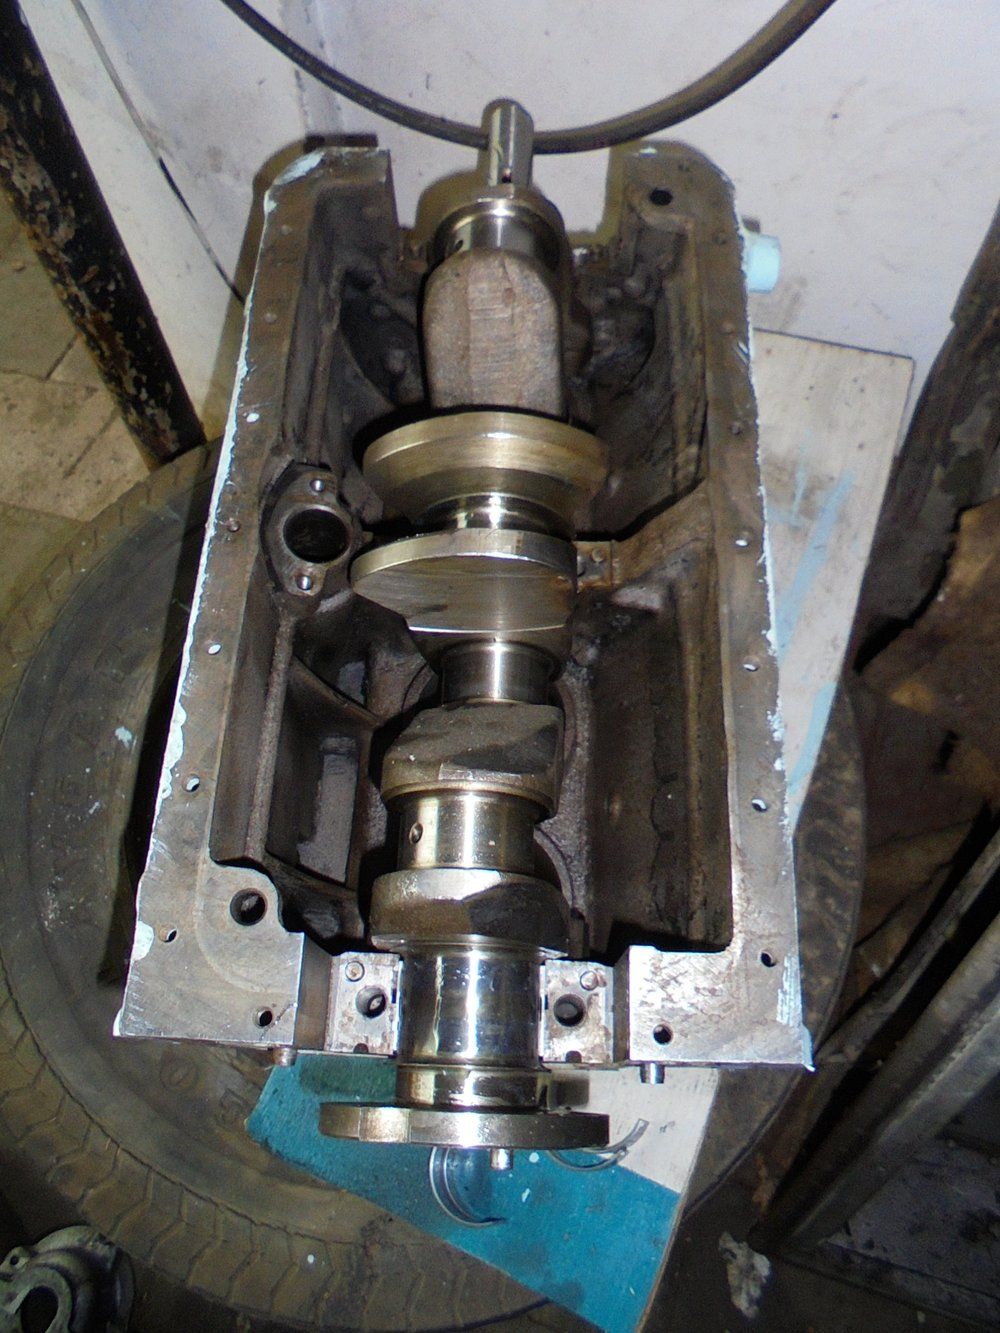 1965 series 2a station wagon fitting engine to engine stand5.JPG